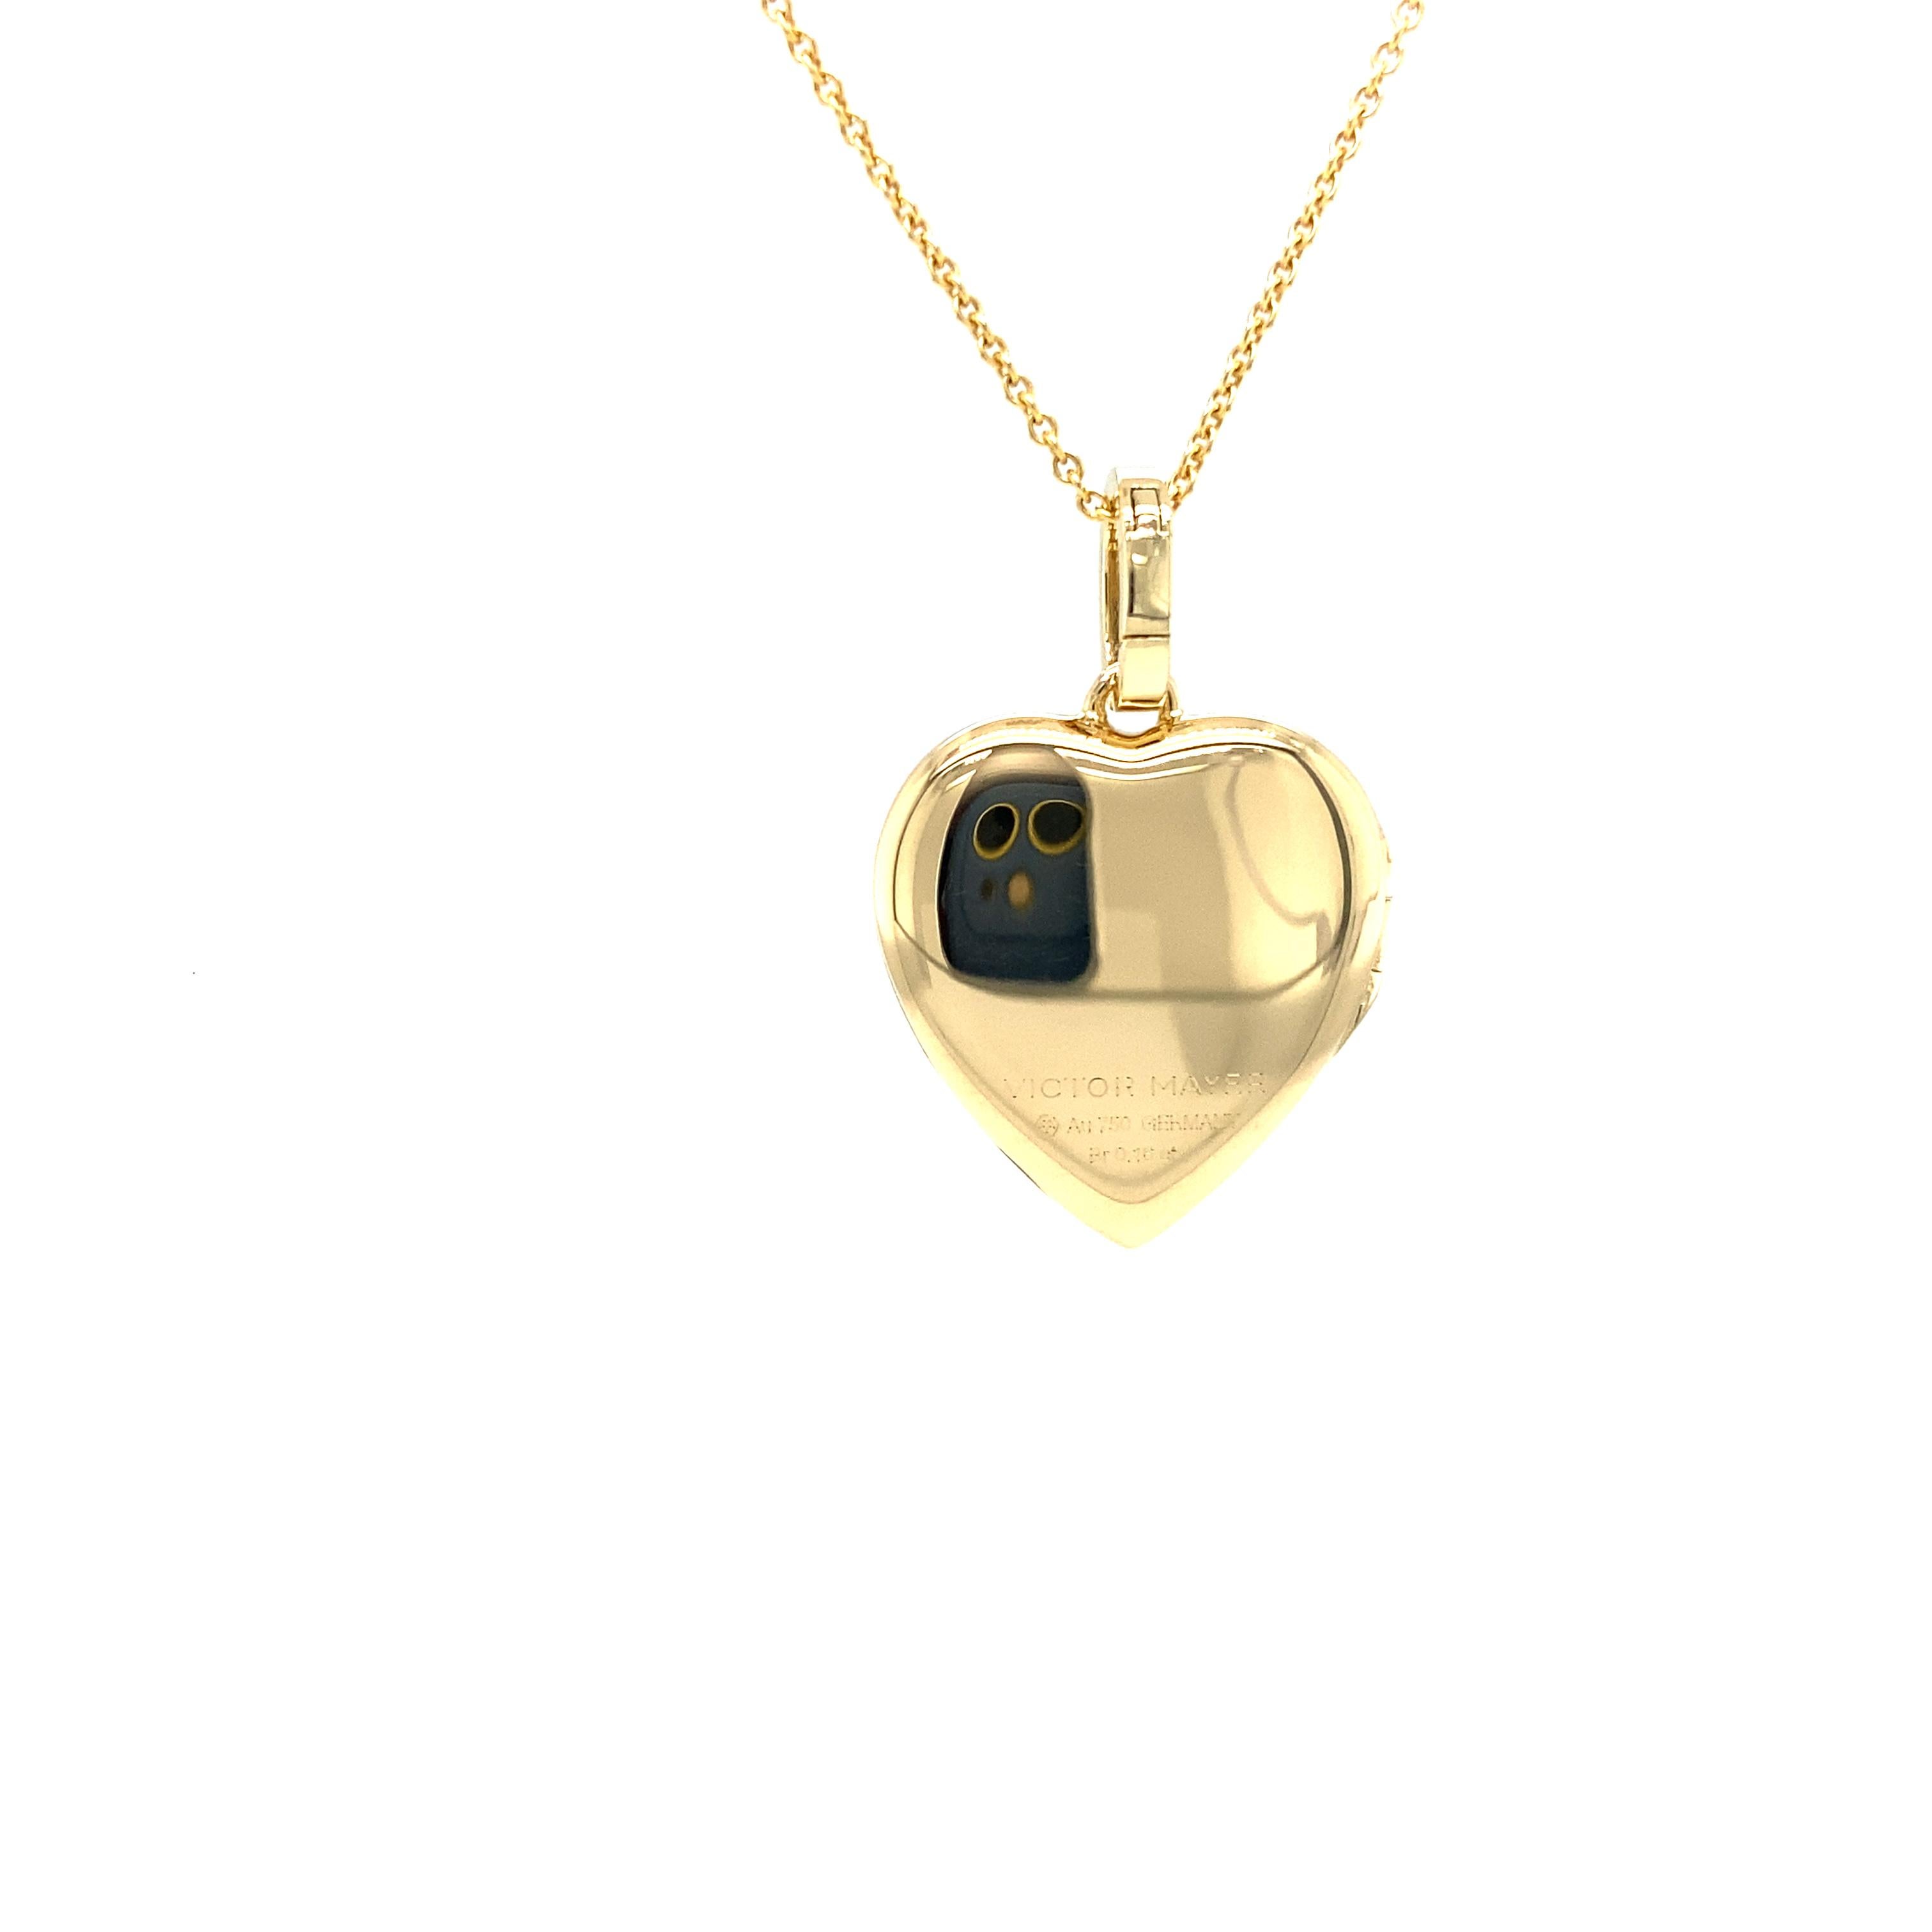 Victorian Heart Shaped Locket Pendant Necklace, 18k Yellow Gold, 8 Diamonds 0.16ct For Sale